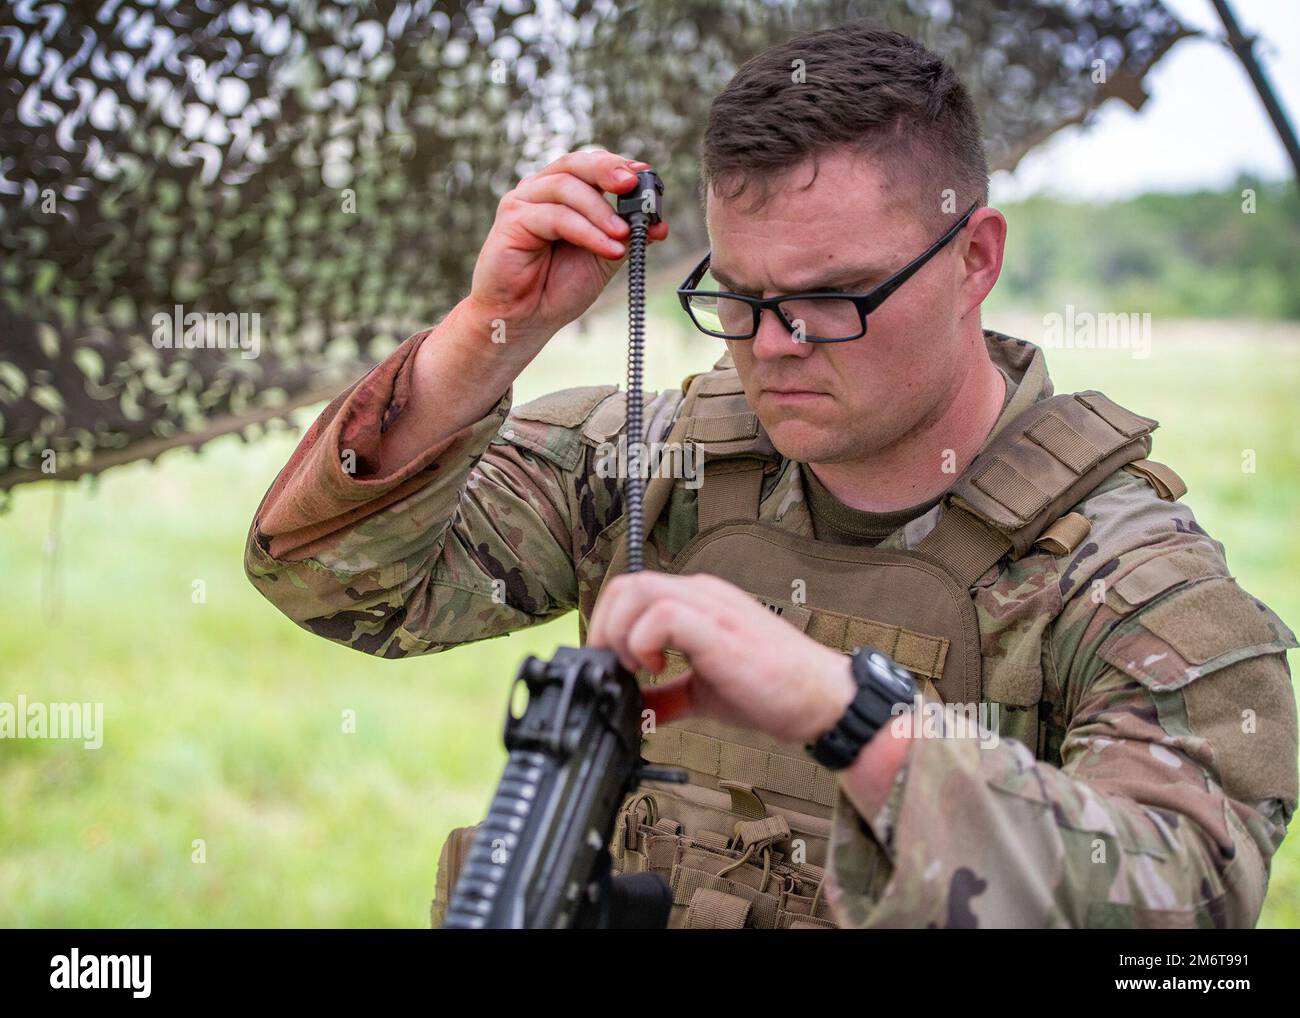 Sgt. Christopher McHann, Regional Training Institute, Texas Army National Guard, is timed as he breaks down and re-assembles a M249 Squad Automatic Weapon(SAW), during the Best Warrior Competition at Camp Swift, May 5, 2022. The three-day competition challenges service members on professional military knowledge, marksmanship, obstacle course and land navigation. The Army winners of this event will move on to represent Texas at the National Guard’s Region V Best Warrior Competition. Texas Army National Guard photo by Sgt. 1st Class Mark Scovell Stock Photo